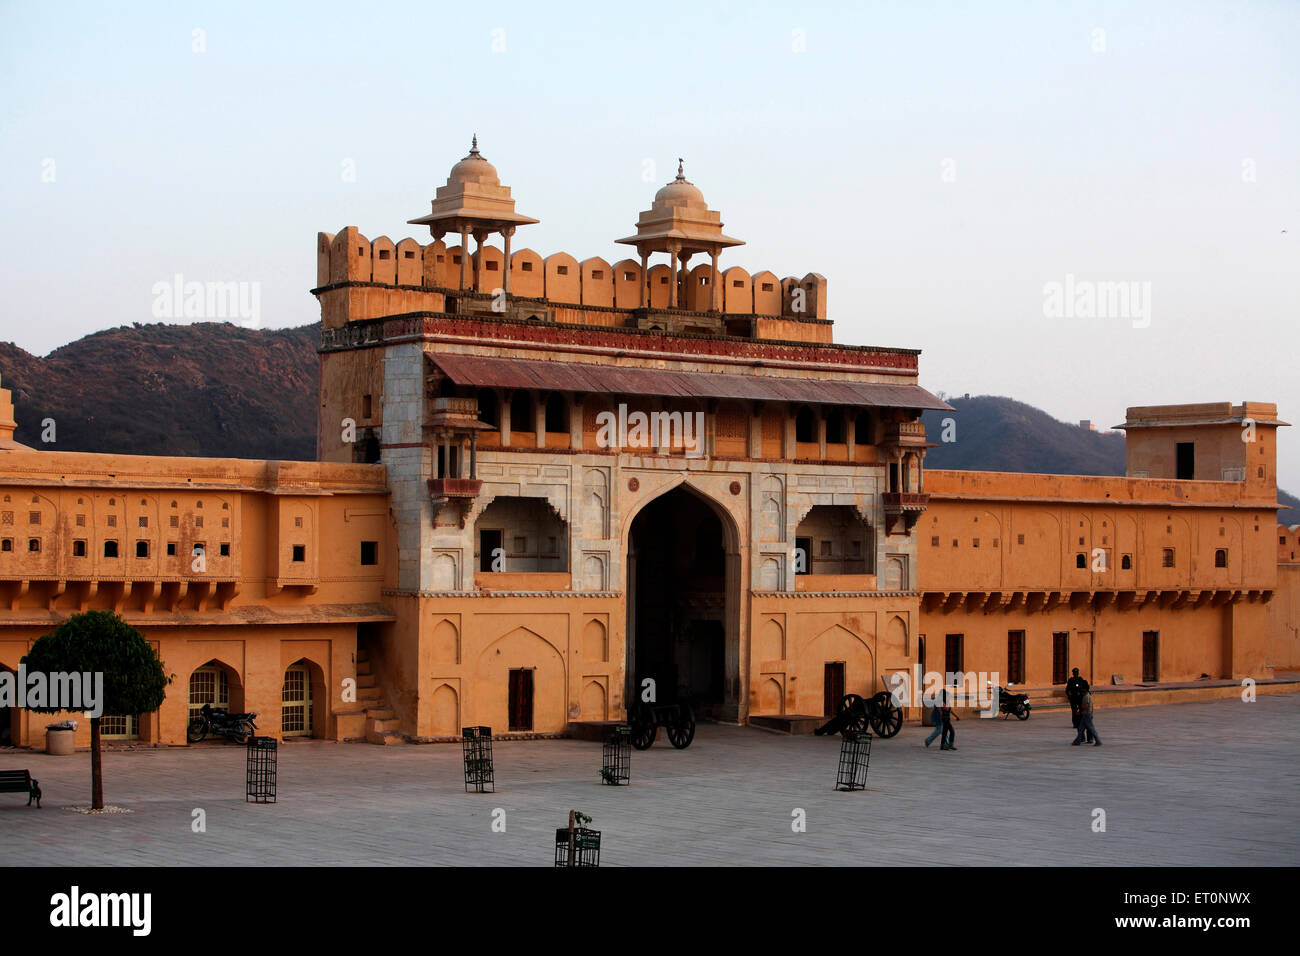 Arched gate of Amber or  Amer fort constructed in 1592  ;  Jaipur  ; Rajasthan  ;  India Stock Photo